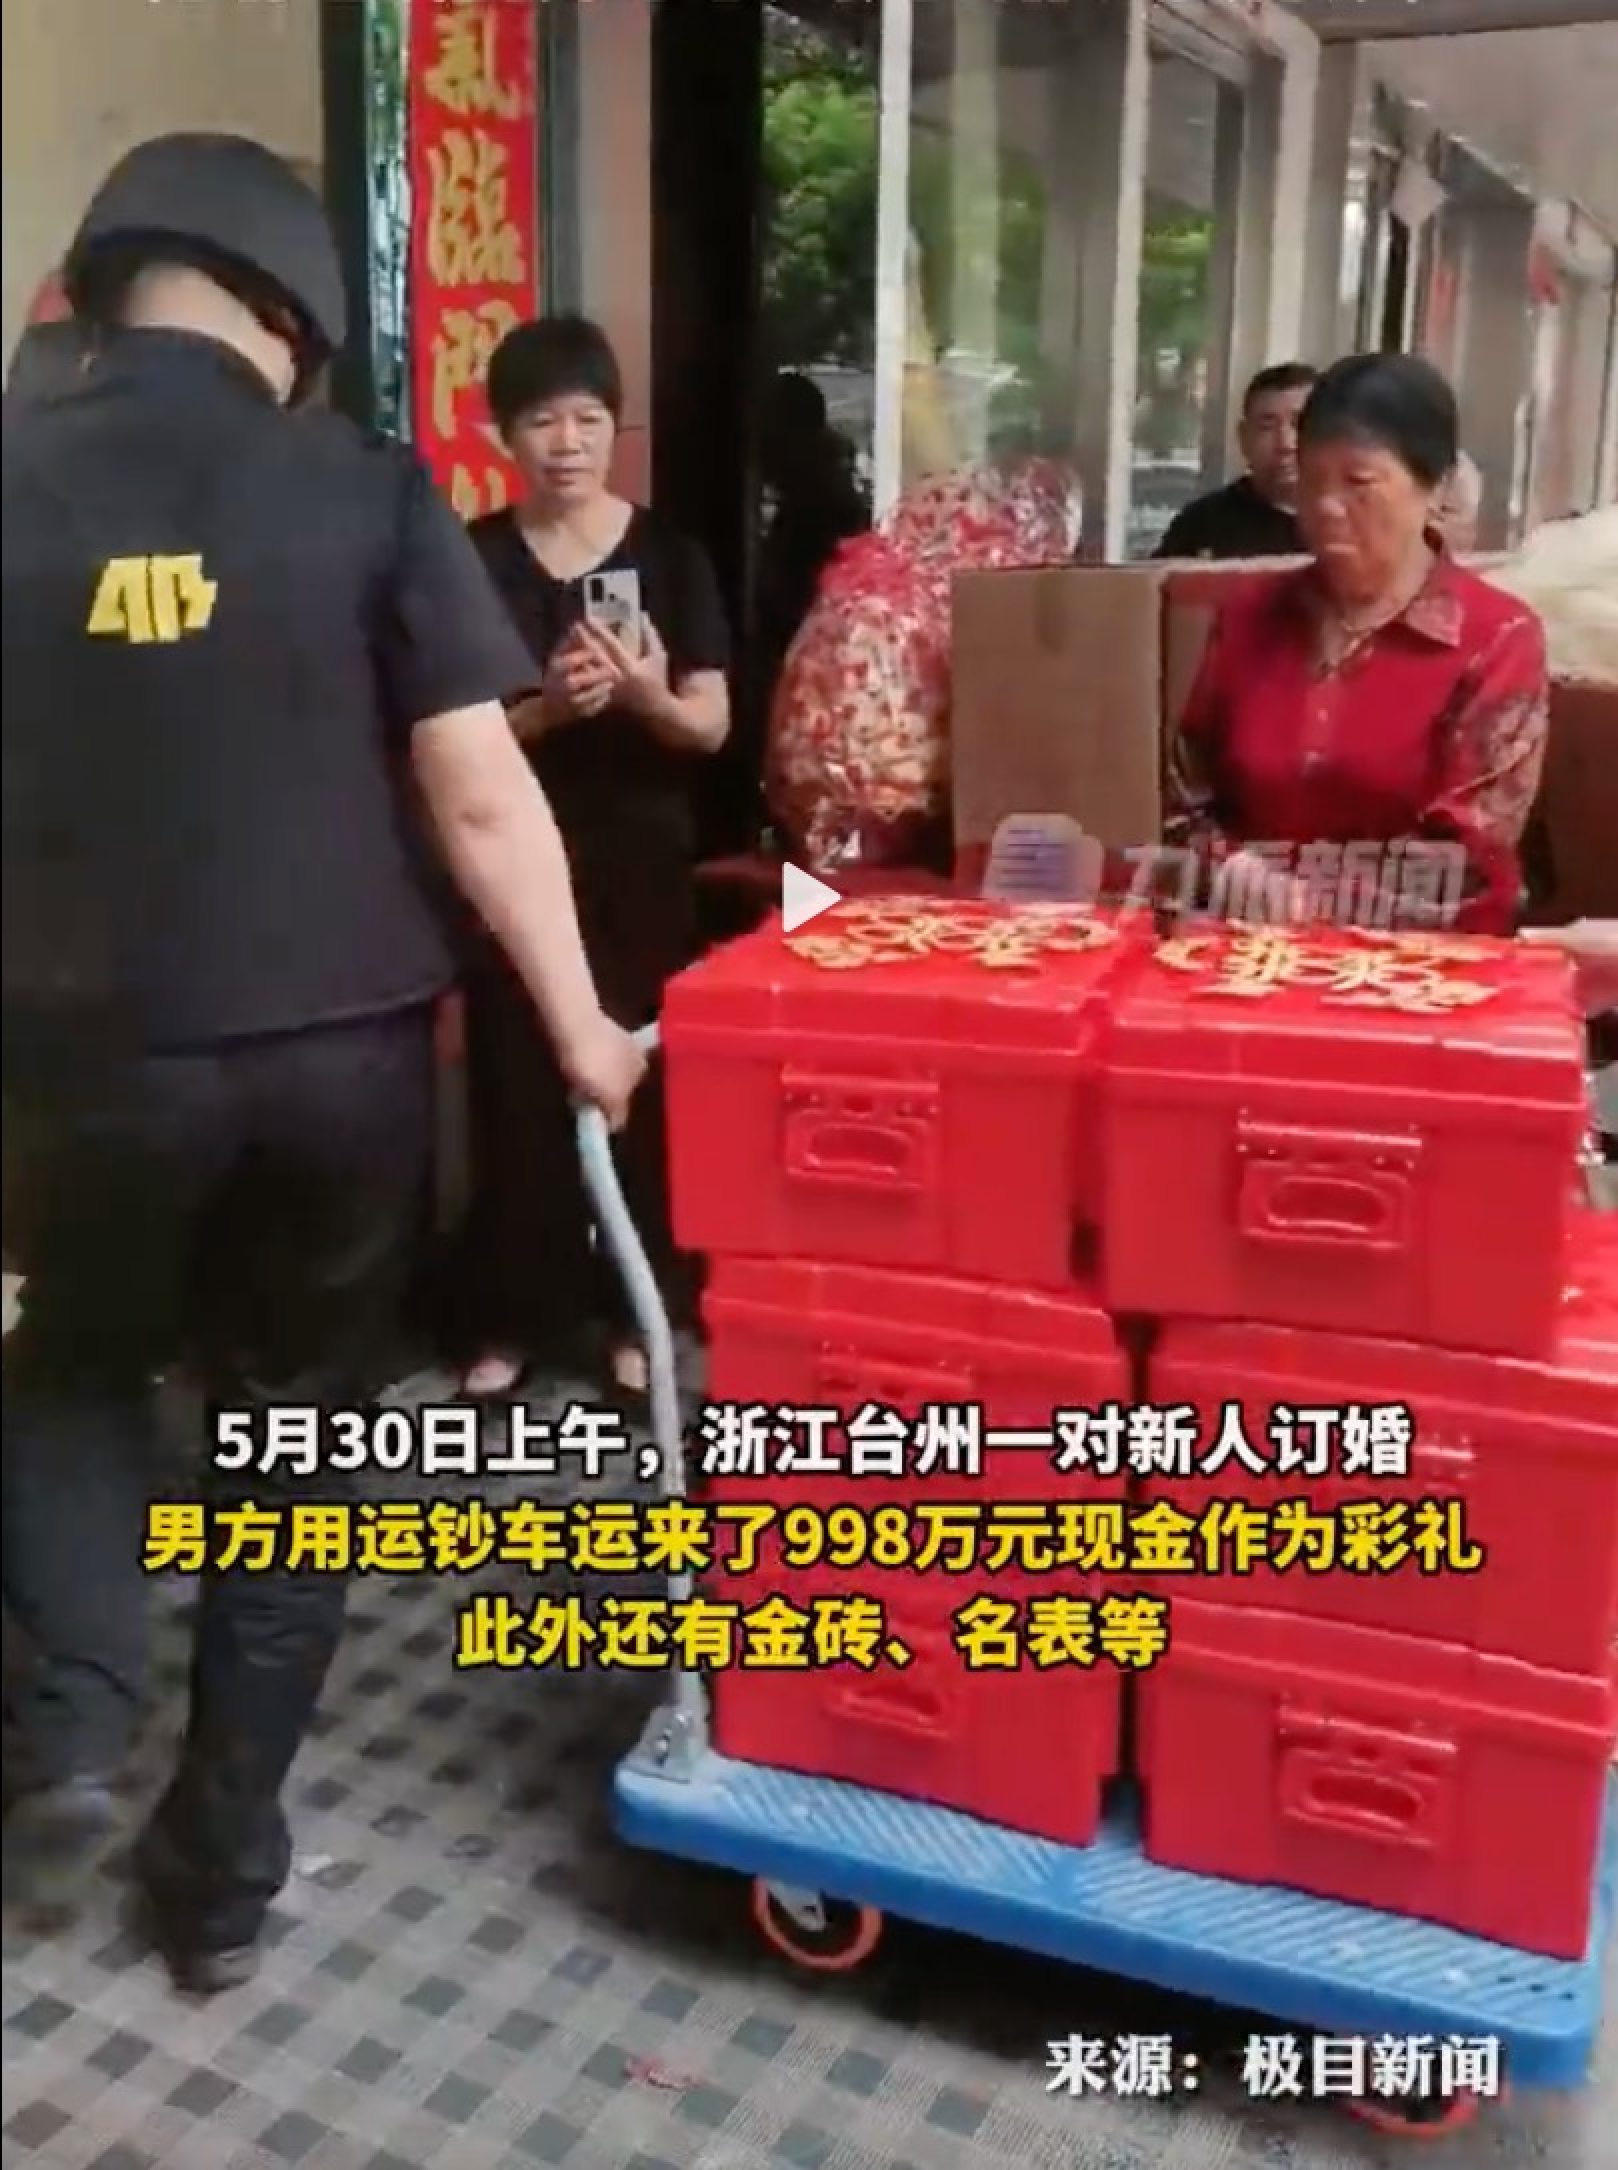 The “bride price” gift arrives at the pre-wedding ceremony amid tight security. Photo: Jiupai News